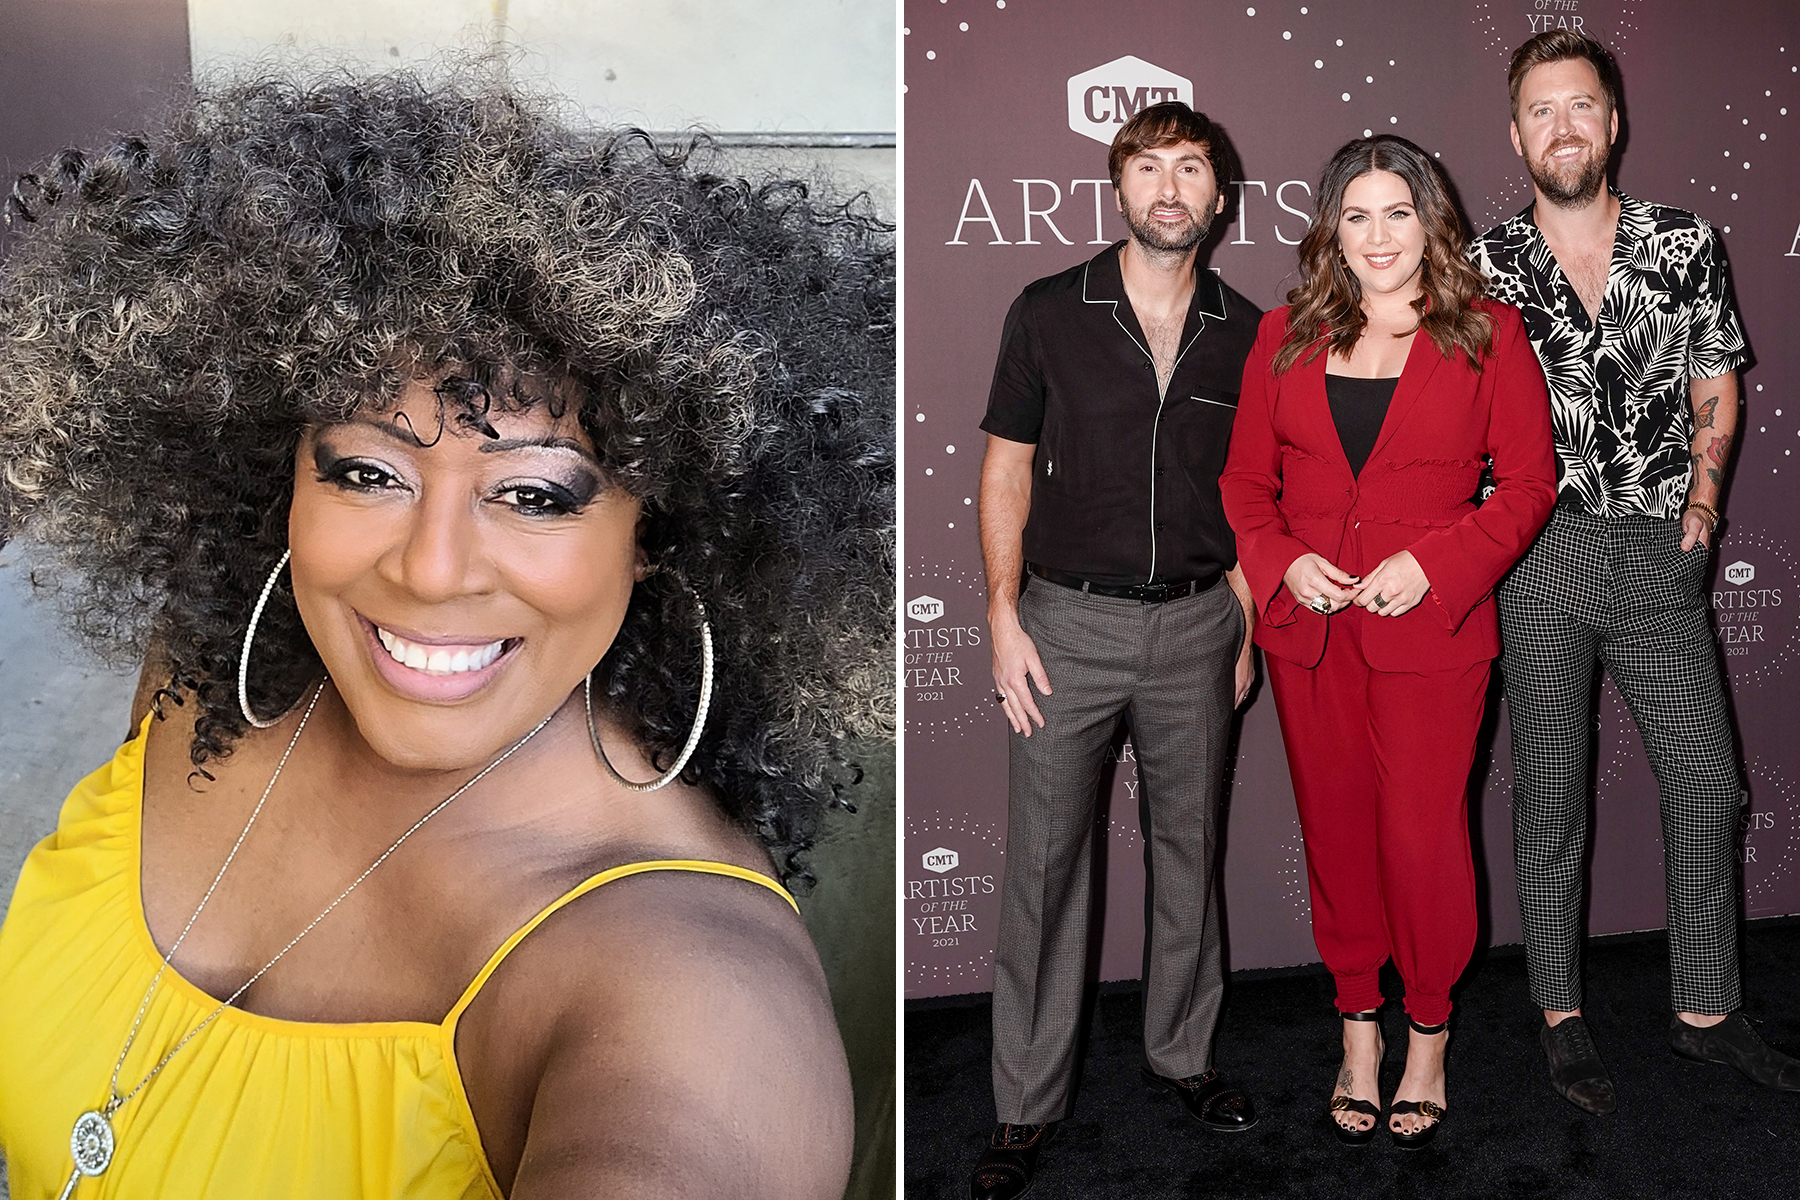 Lady A Name Lawsuit – Country Trio and Anita White Resolve Dispute